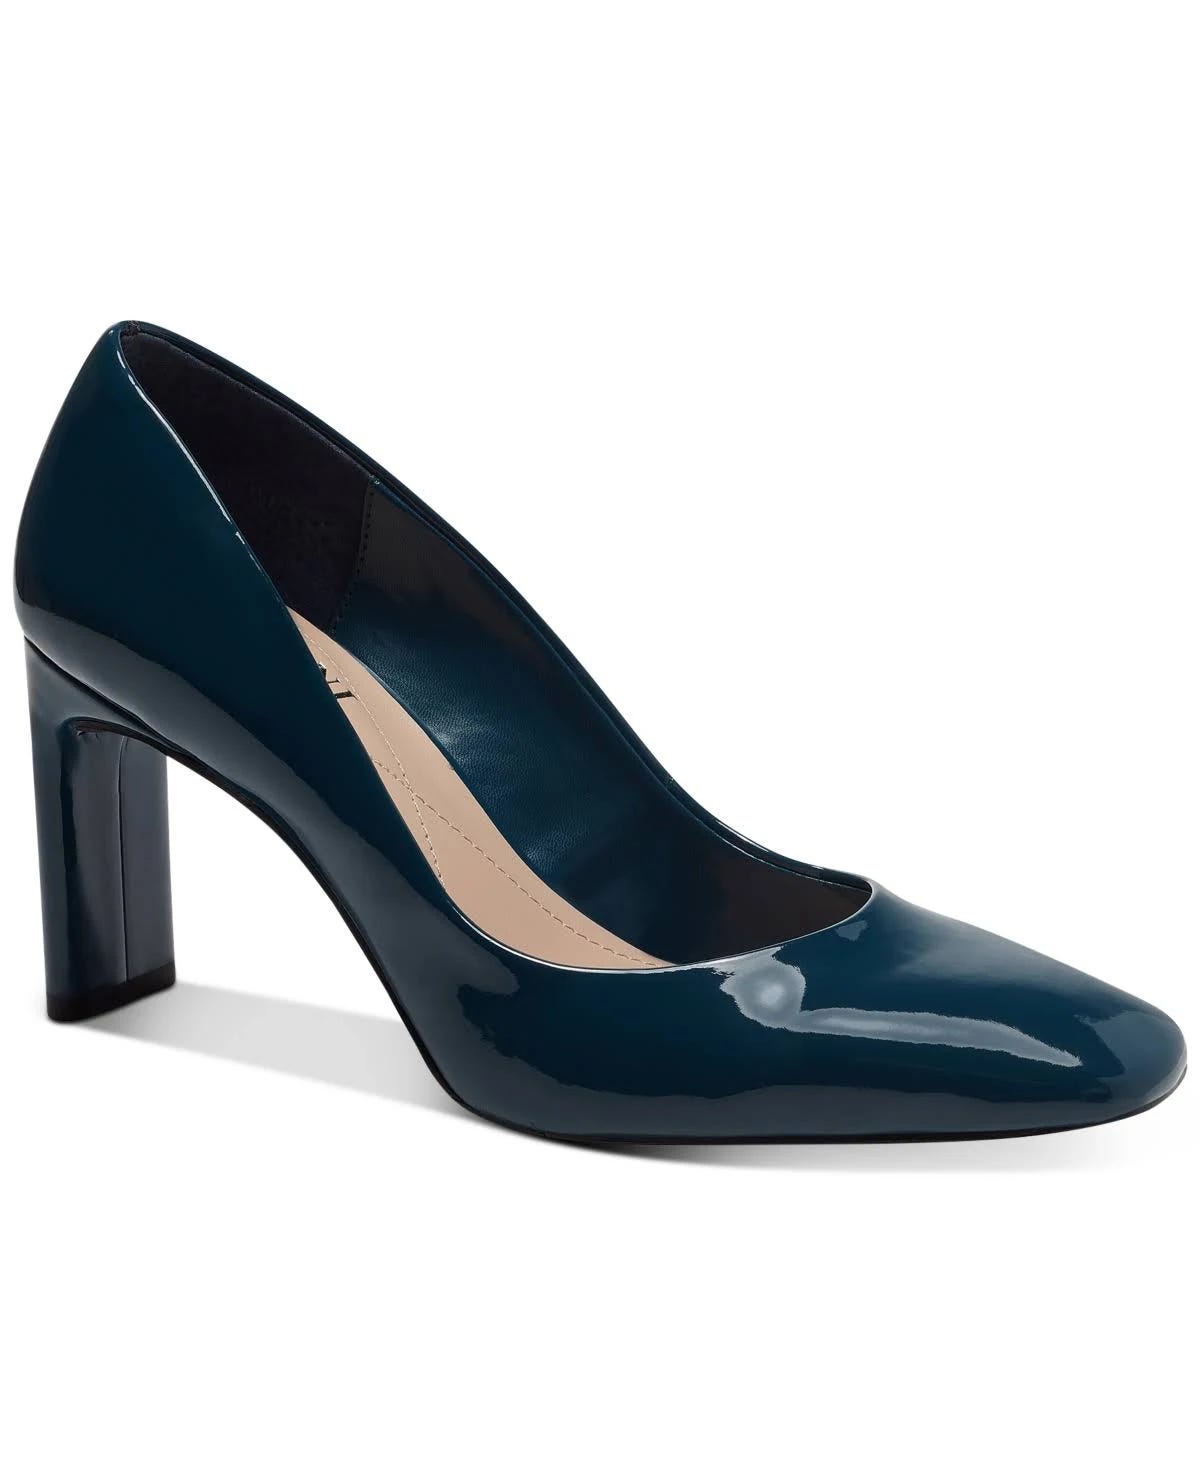 Alfani Step N' Flex Women's Teal Patent Pumps with Thick Heel | Image